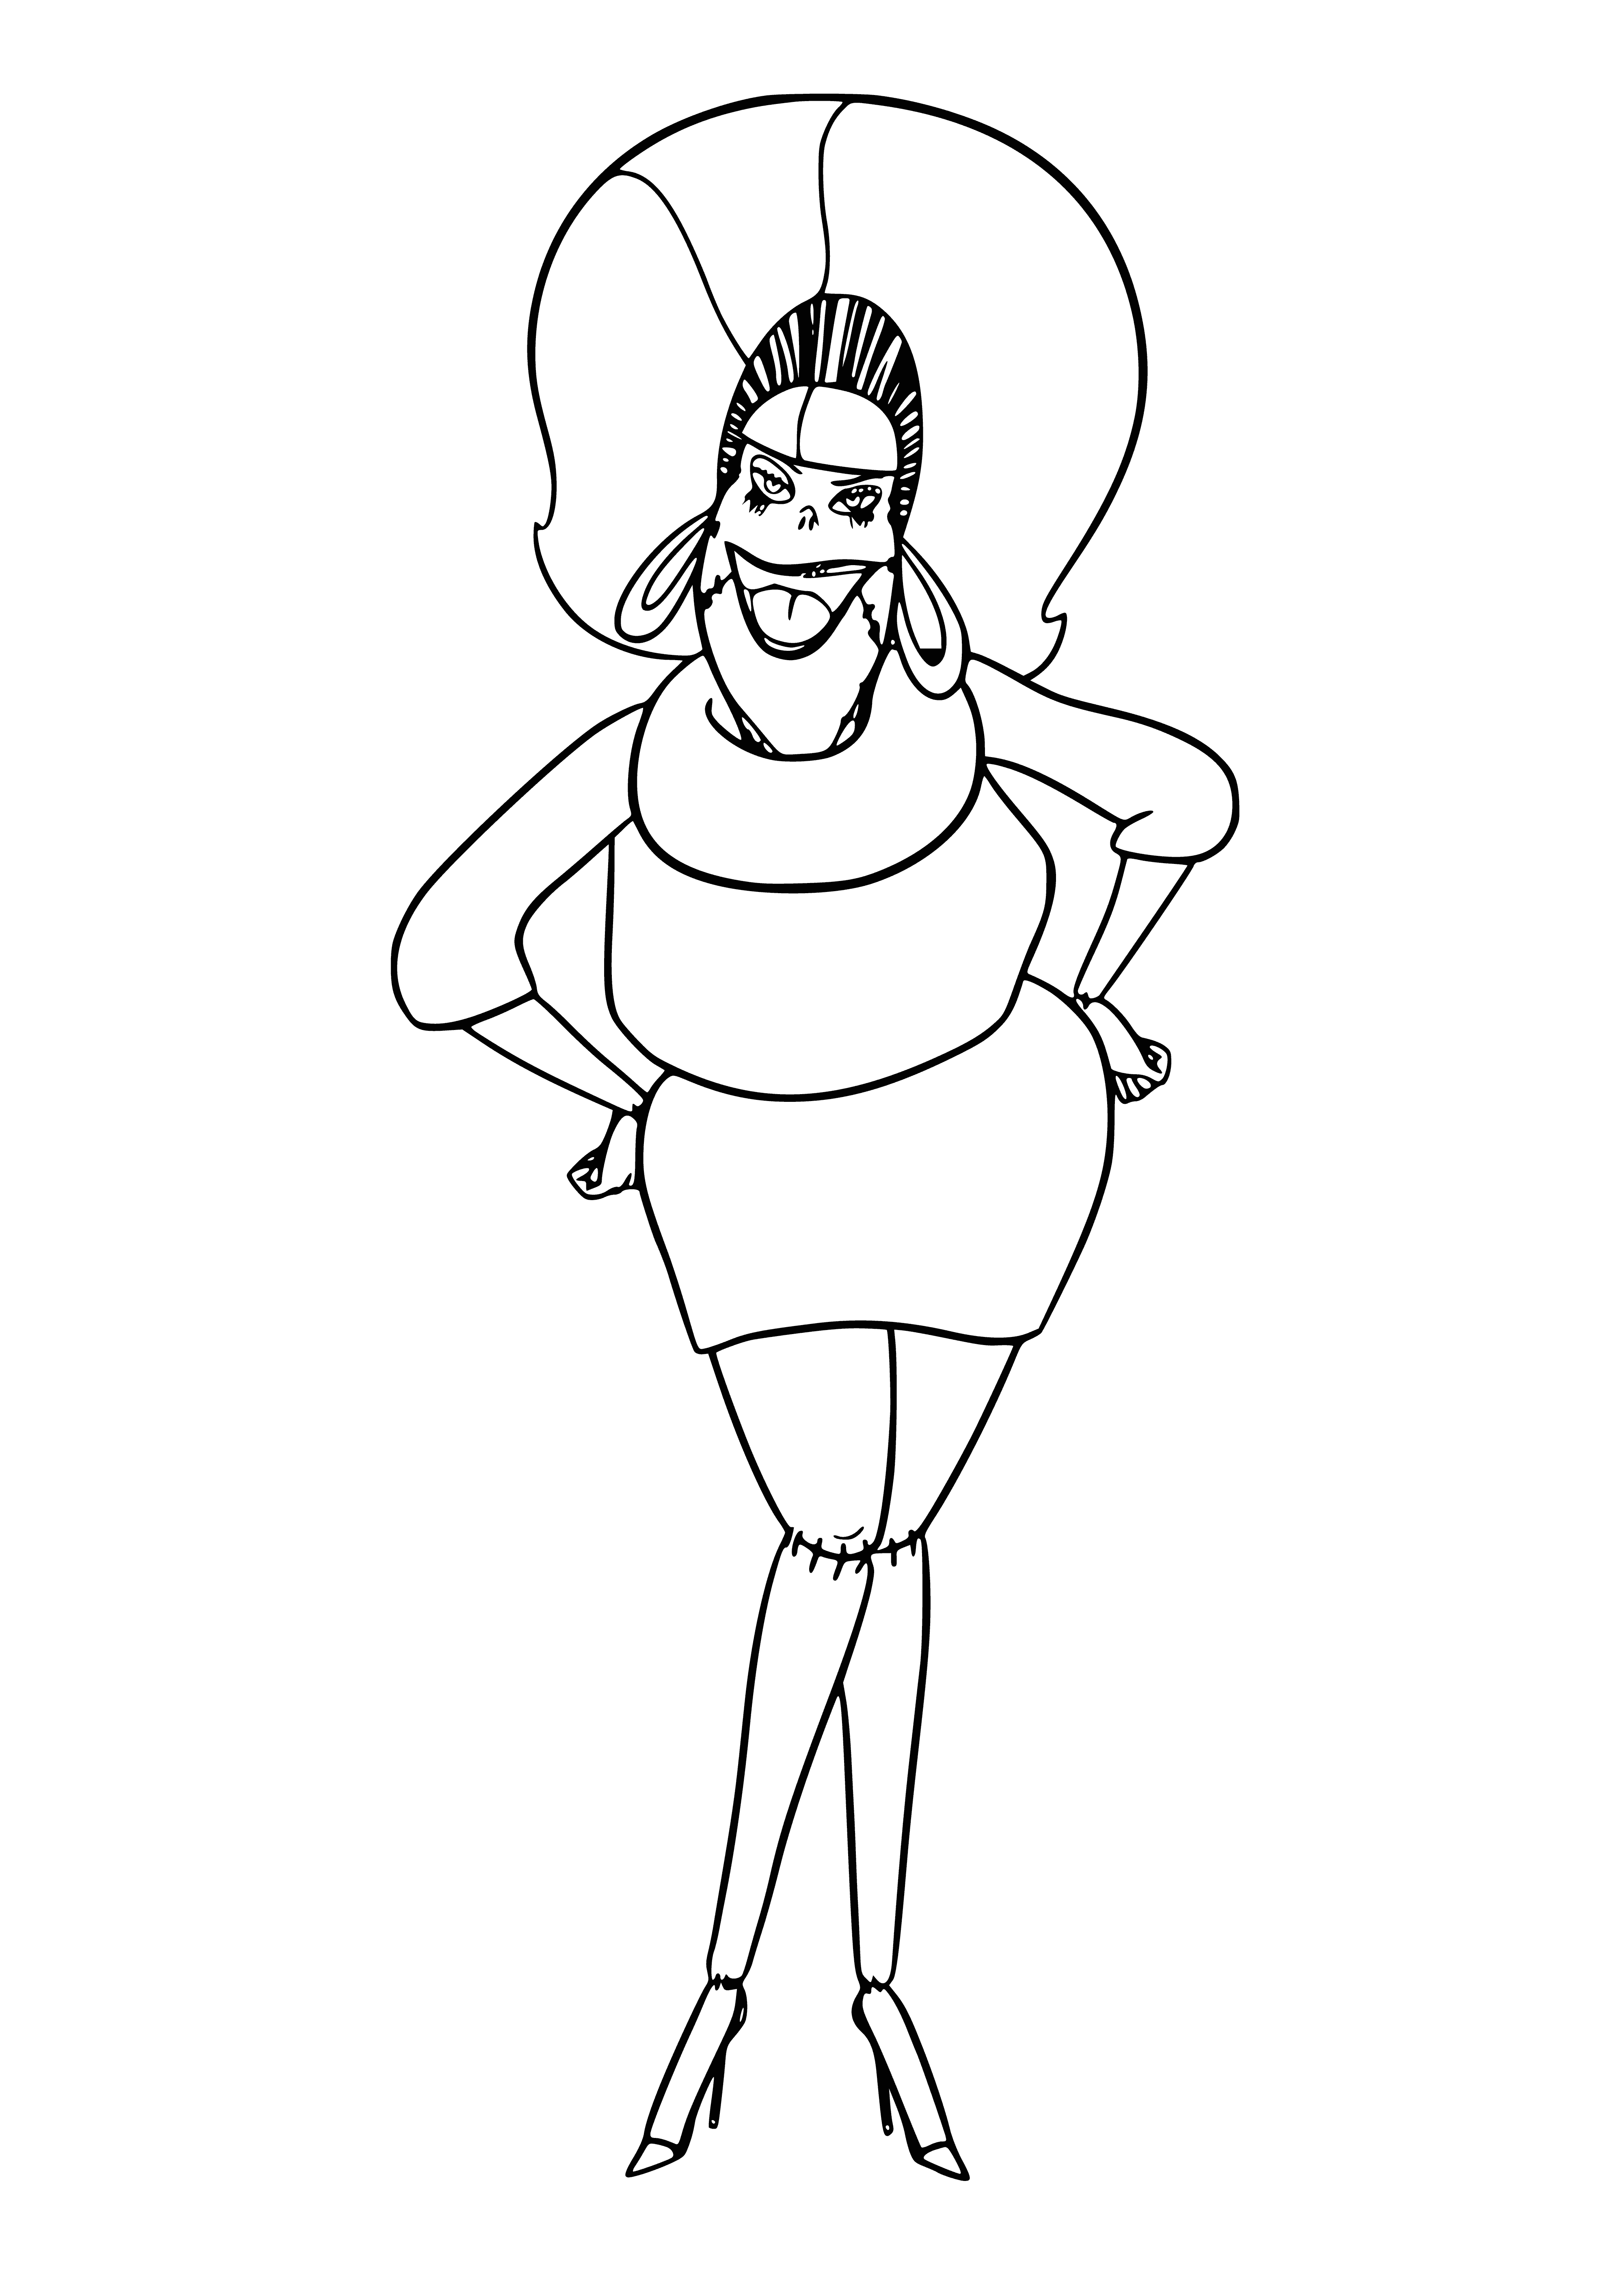 Eunice is the wife of Frankenstein coloring page